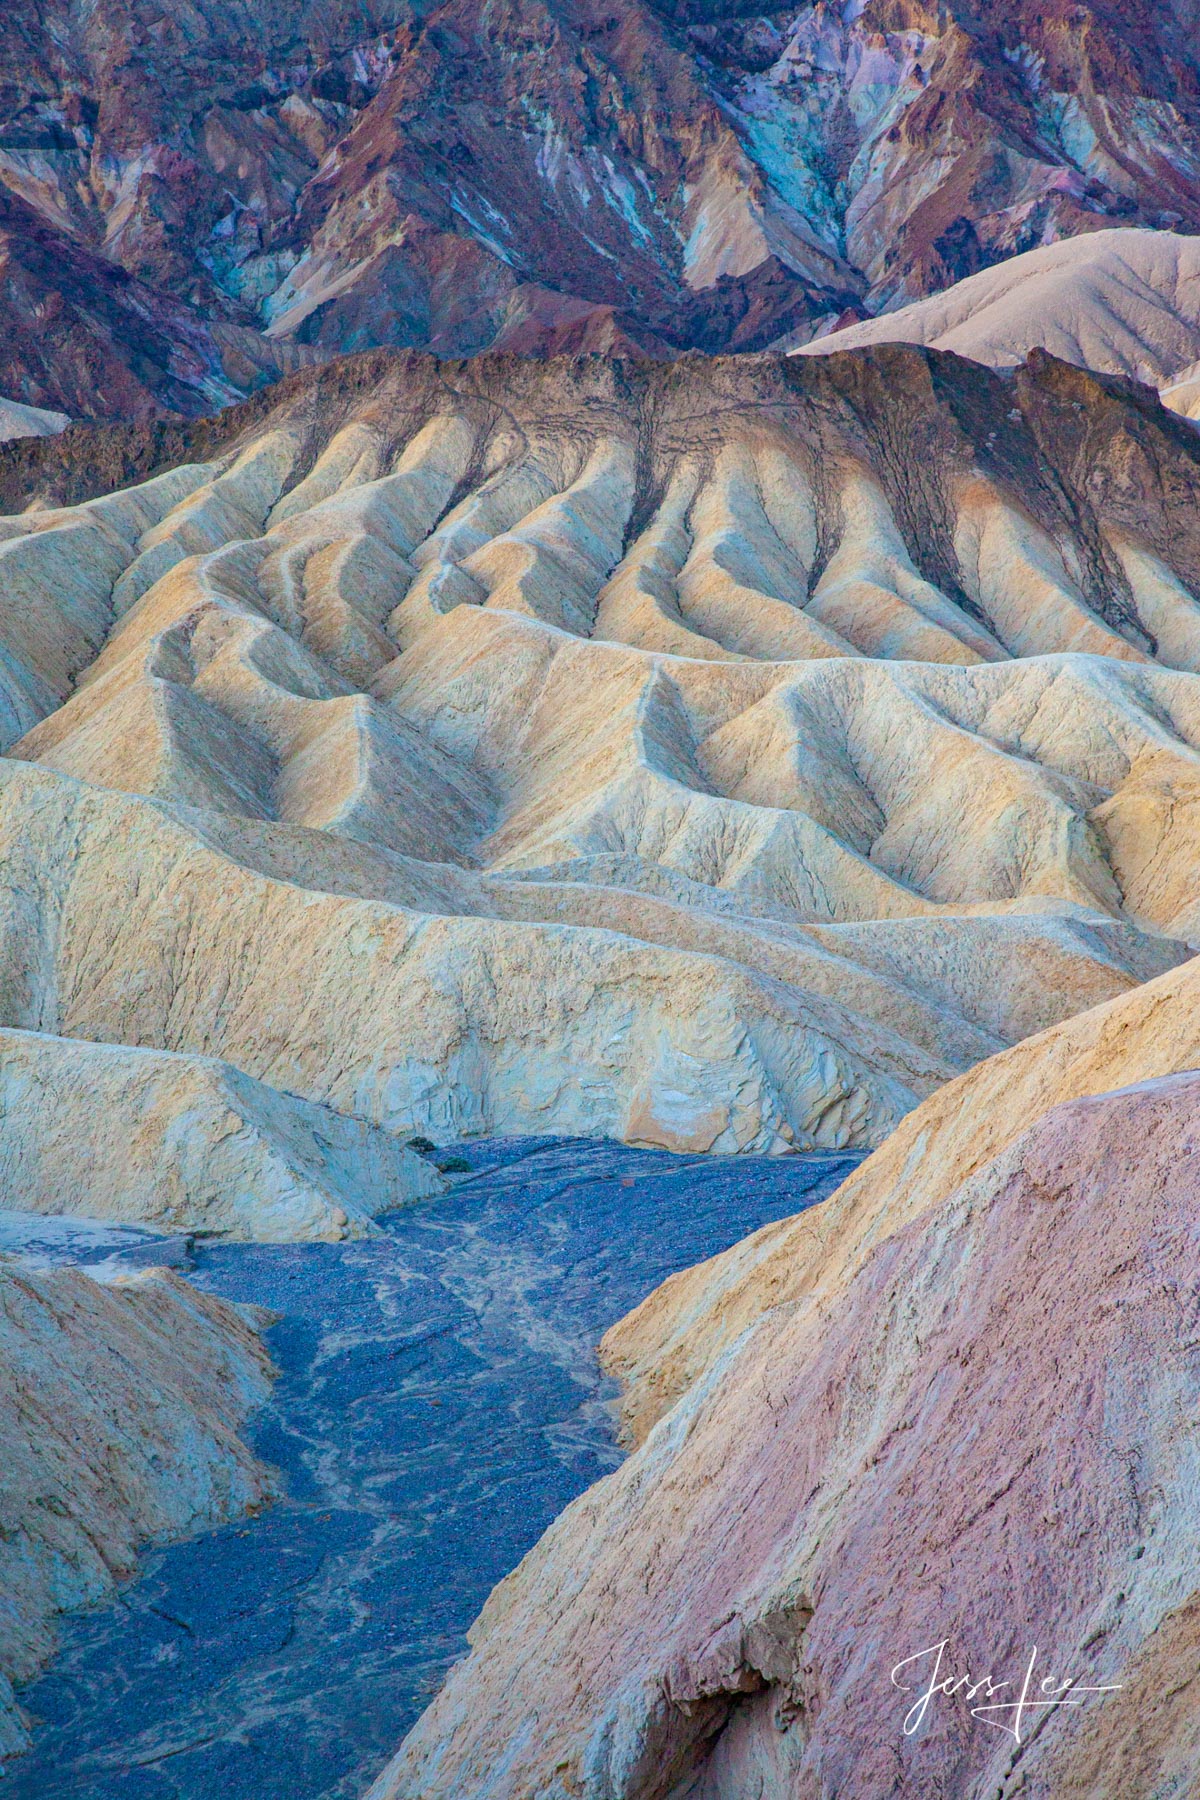 River of Blues in Death Valley, California 